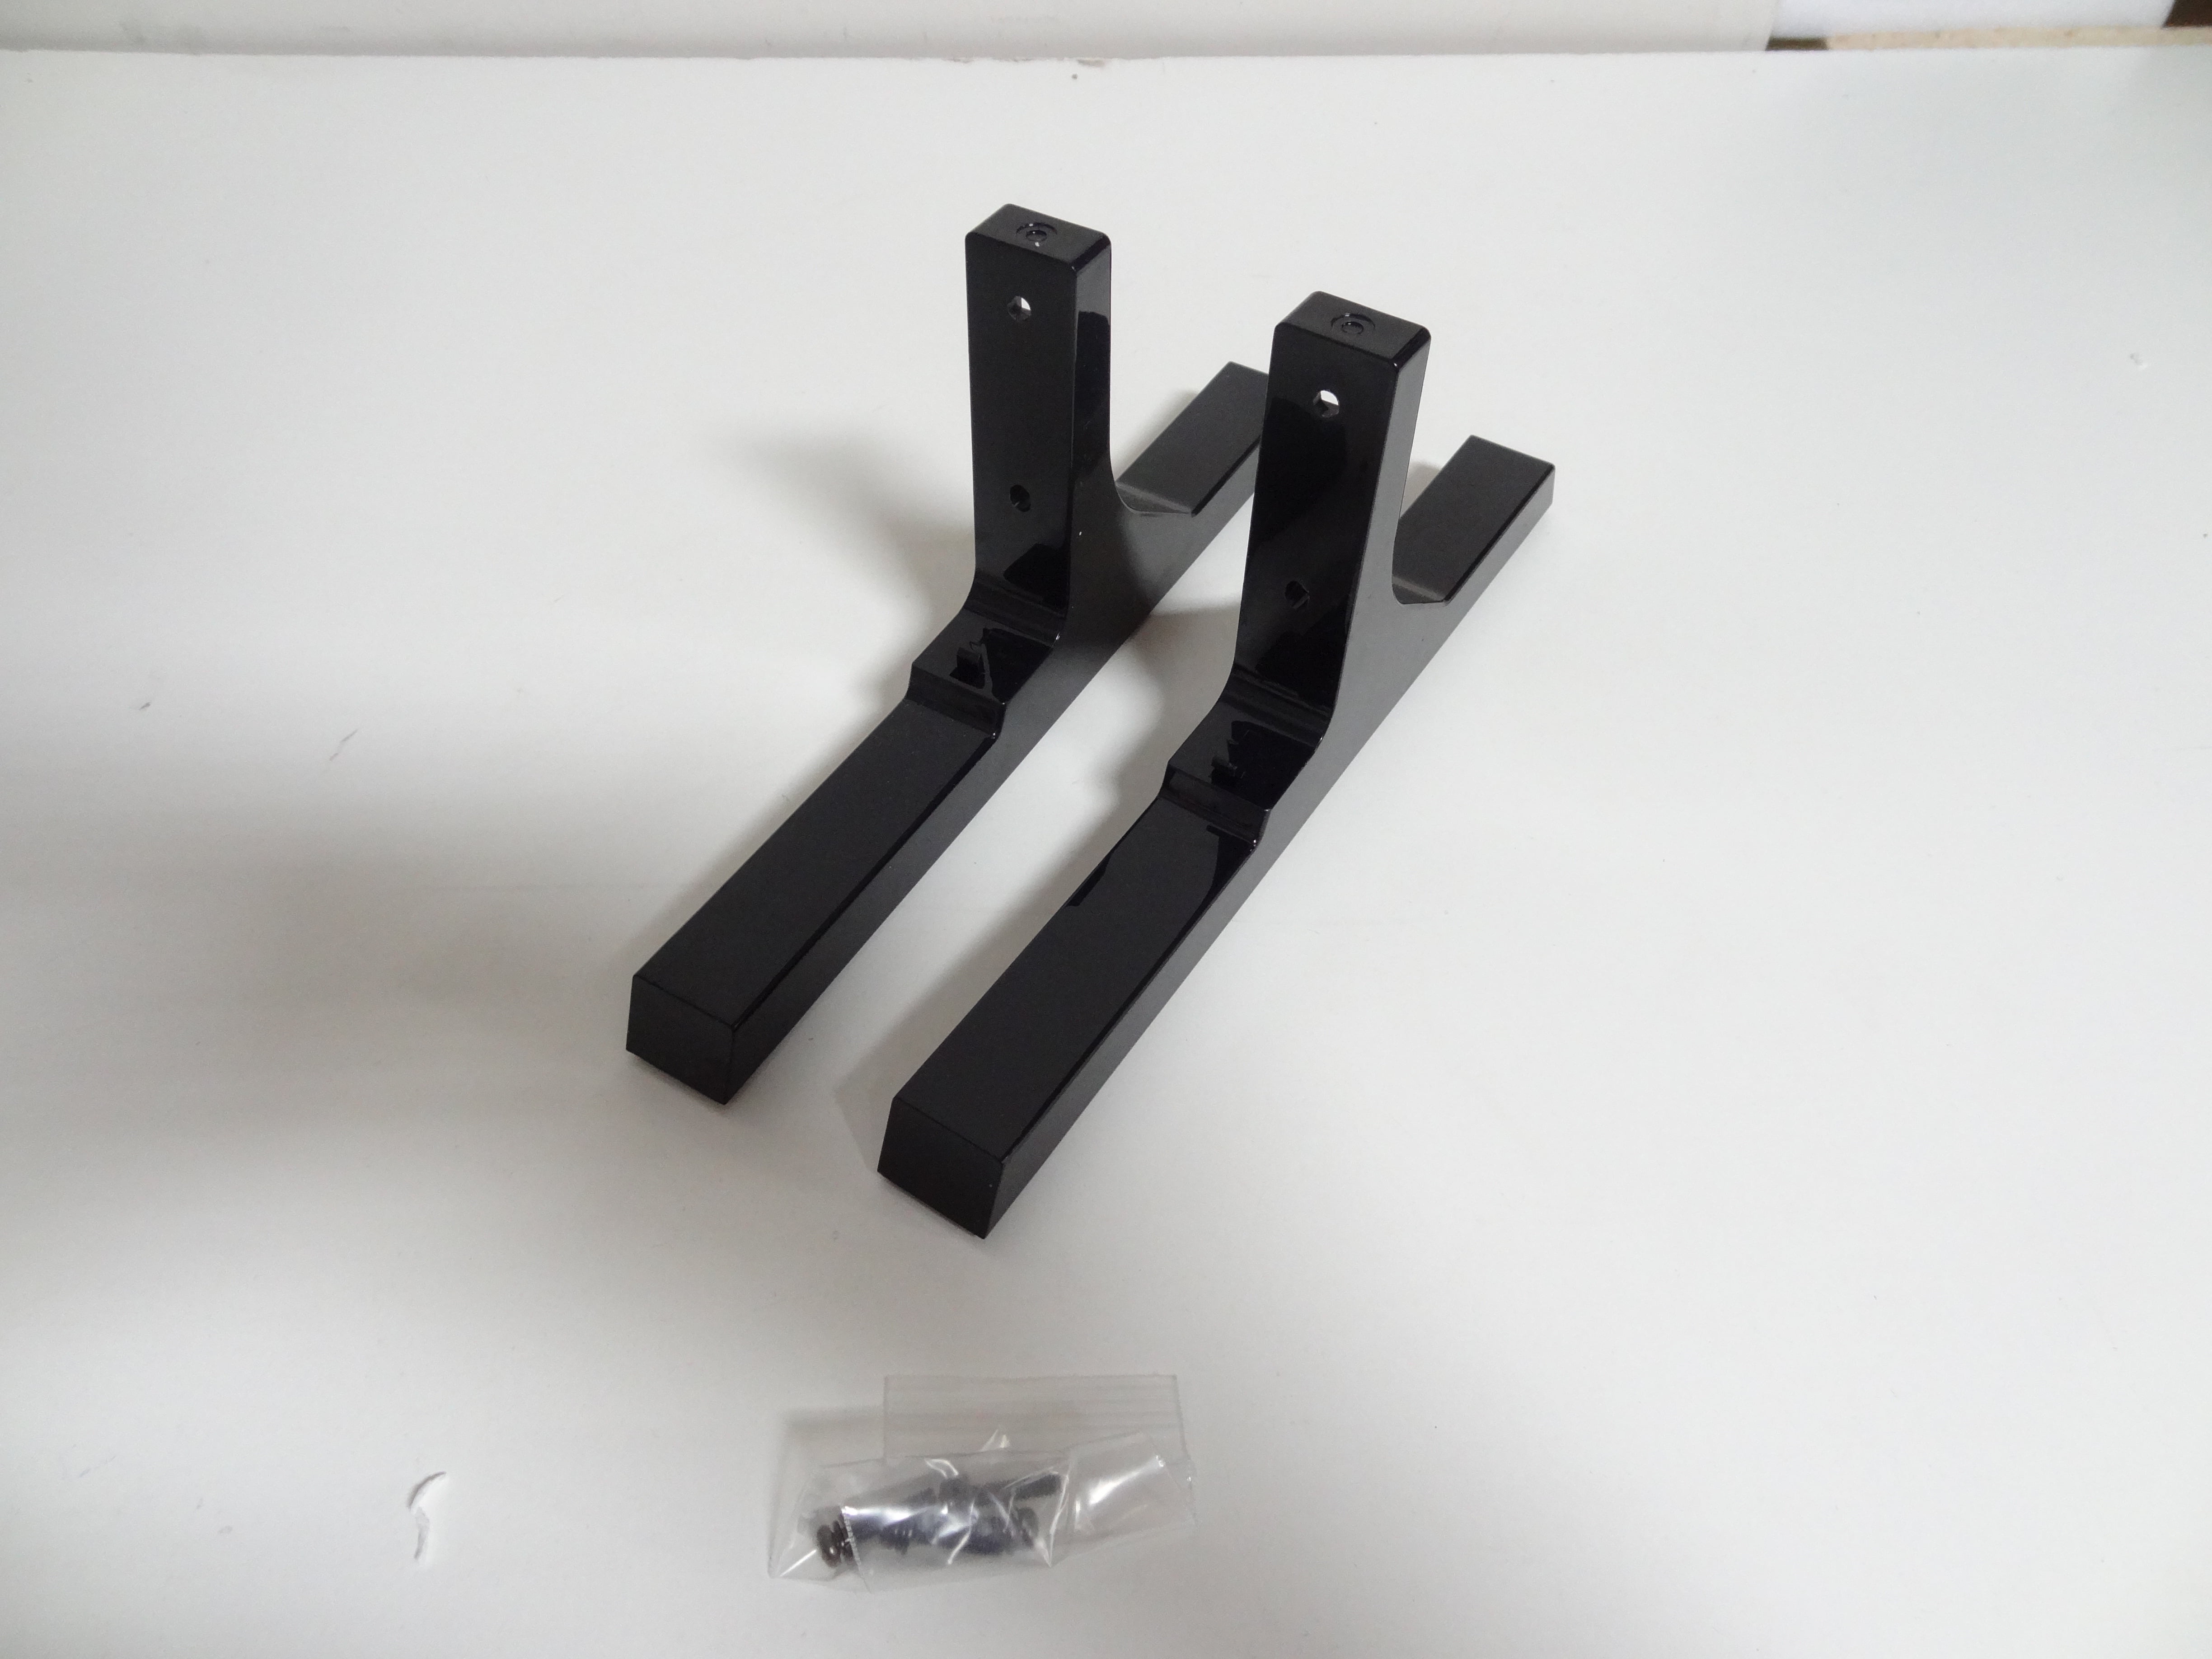 65PFL5504/F7 TV Base Pedestal Stand Feets Legs for Philips 11509 